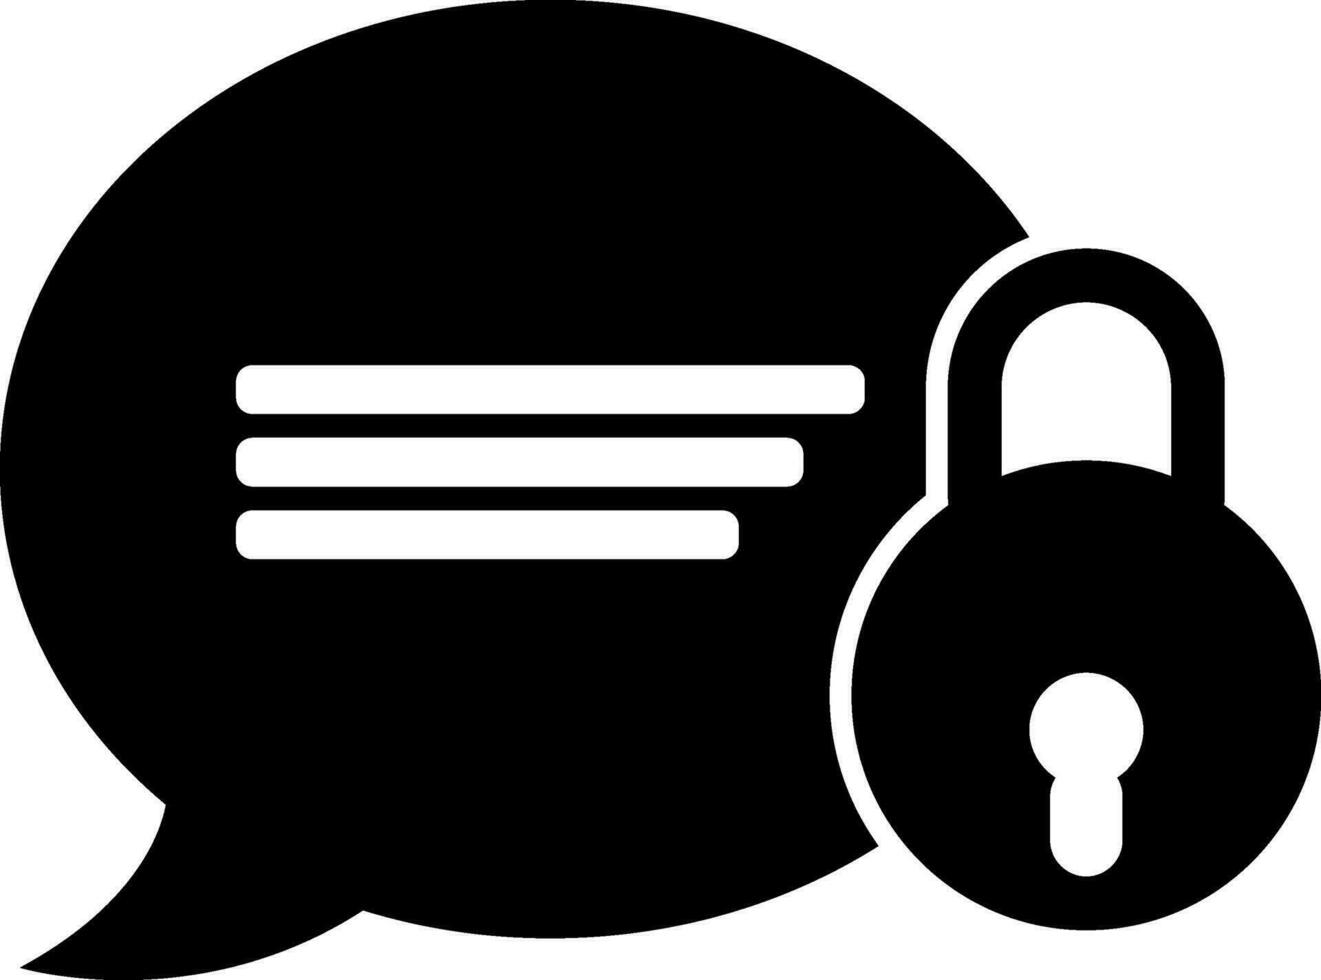 Black and white text message icon with lock. vector